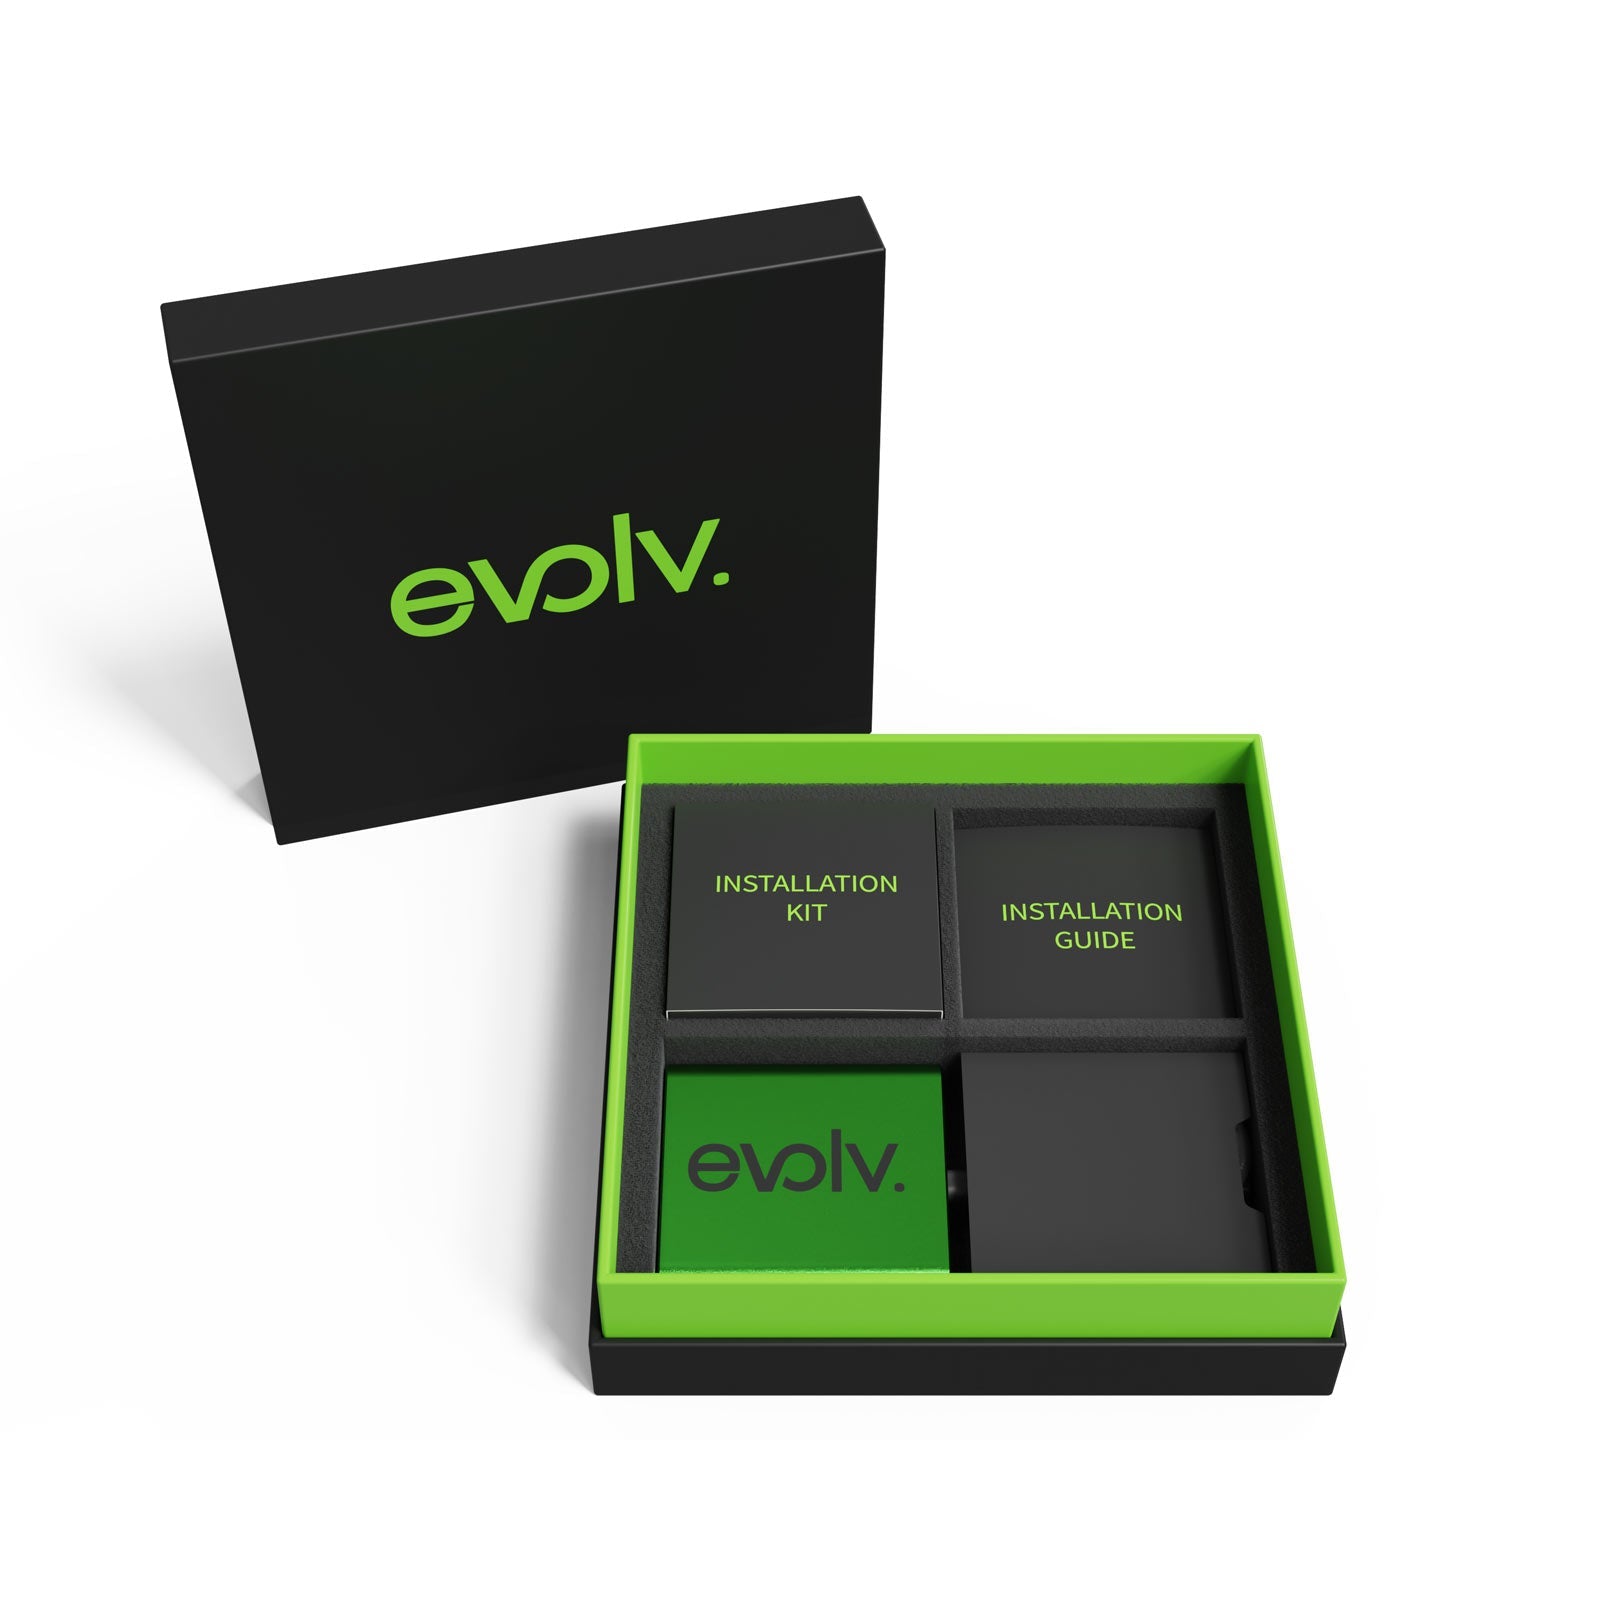 Increase your fuel mileage, performance and throttle response with an Evolv Volvo 960 Performance Chip!